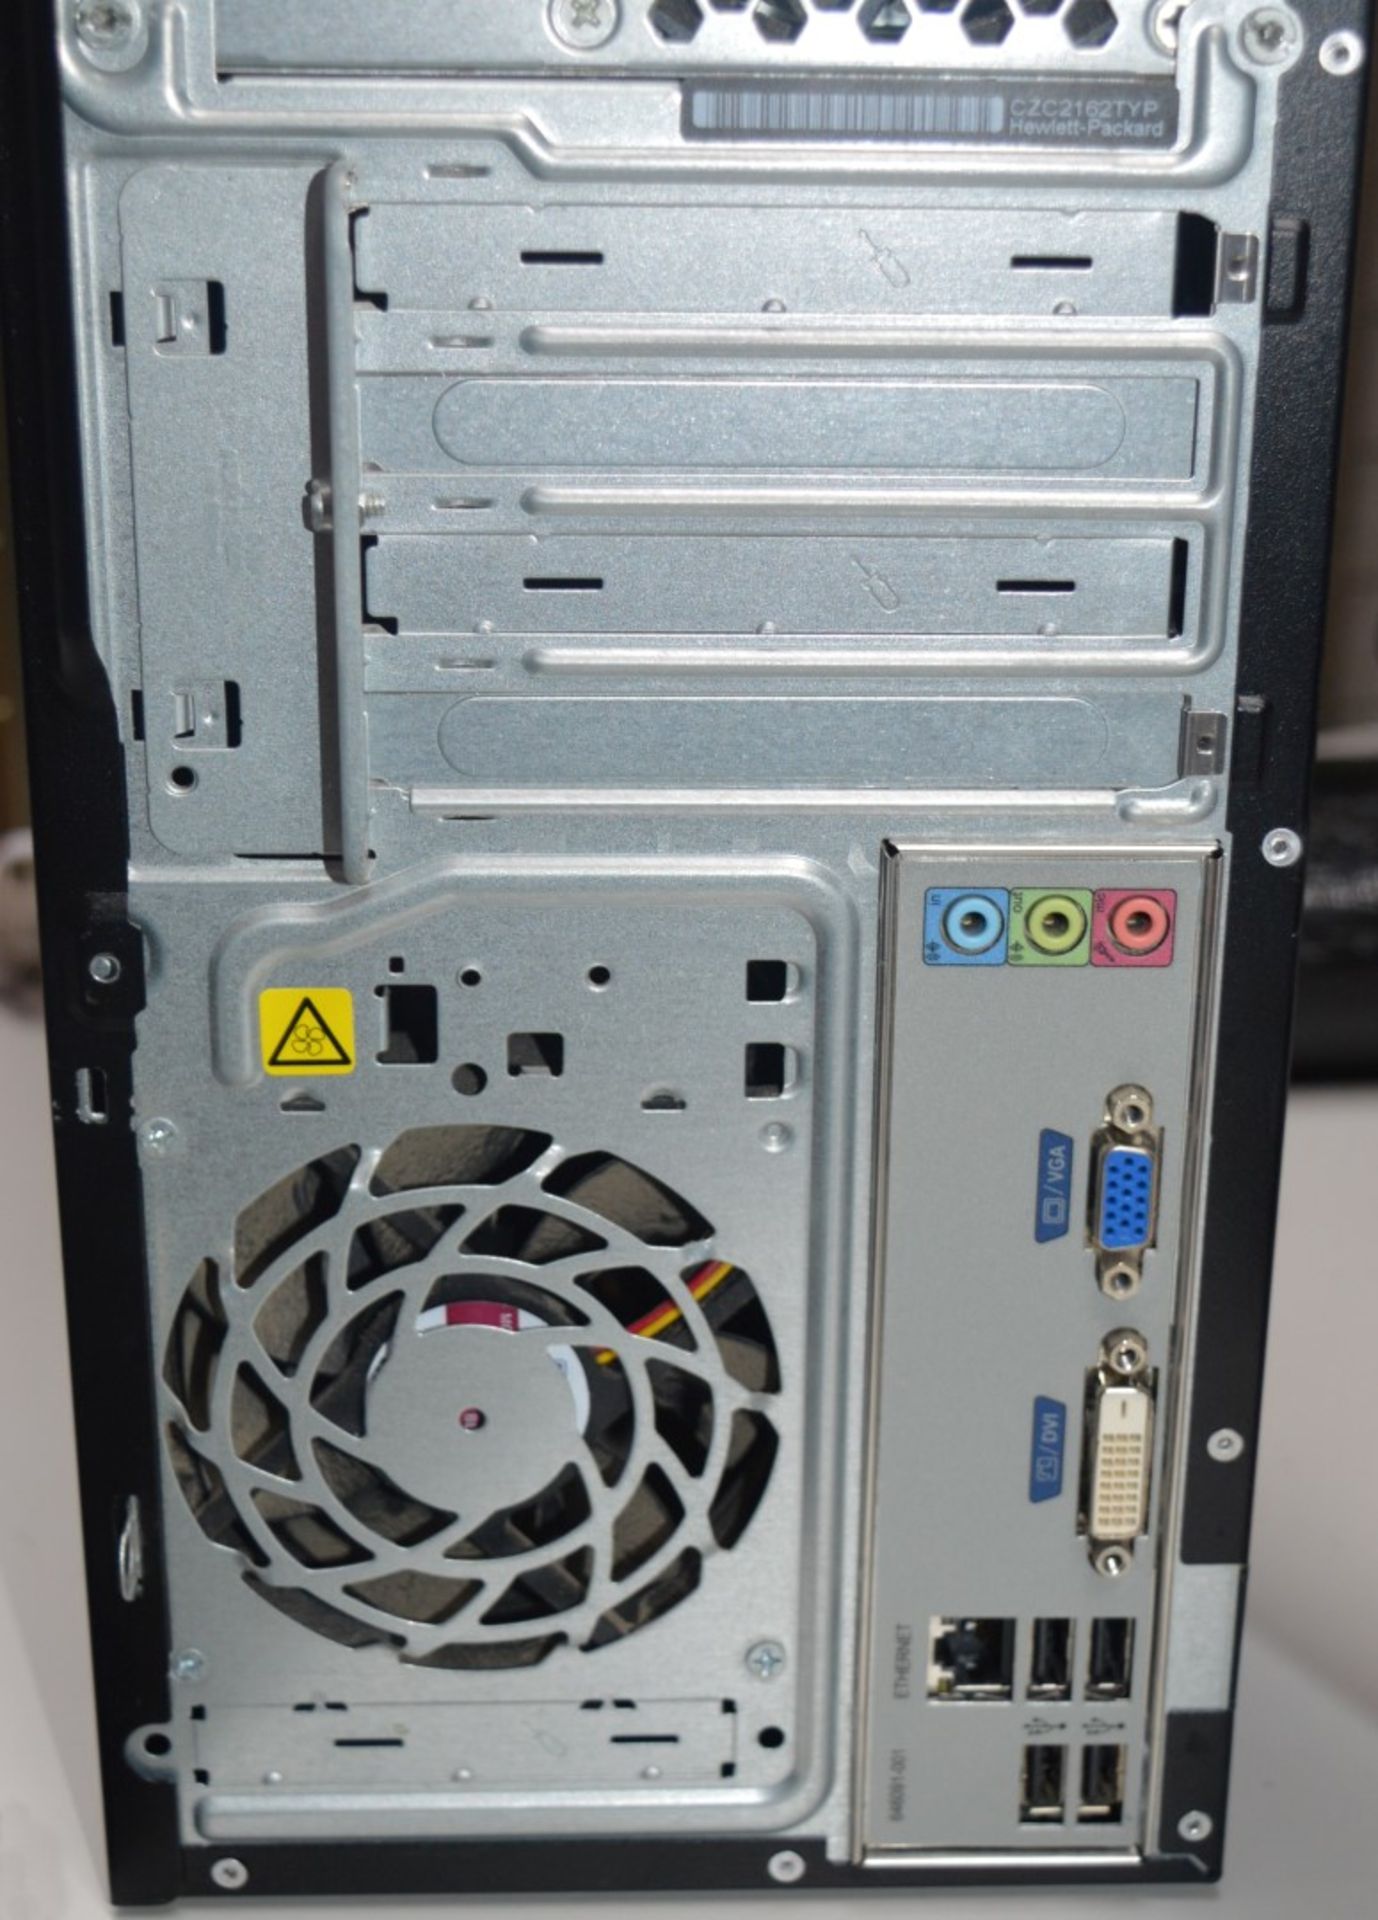 1 x HP Pro Desktop Computer System With Widescreen Monitor - Intel Core i5-2400 3.1ghz Quad Core - Image 4 of 5